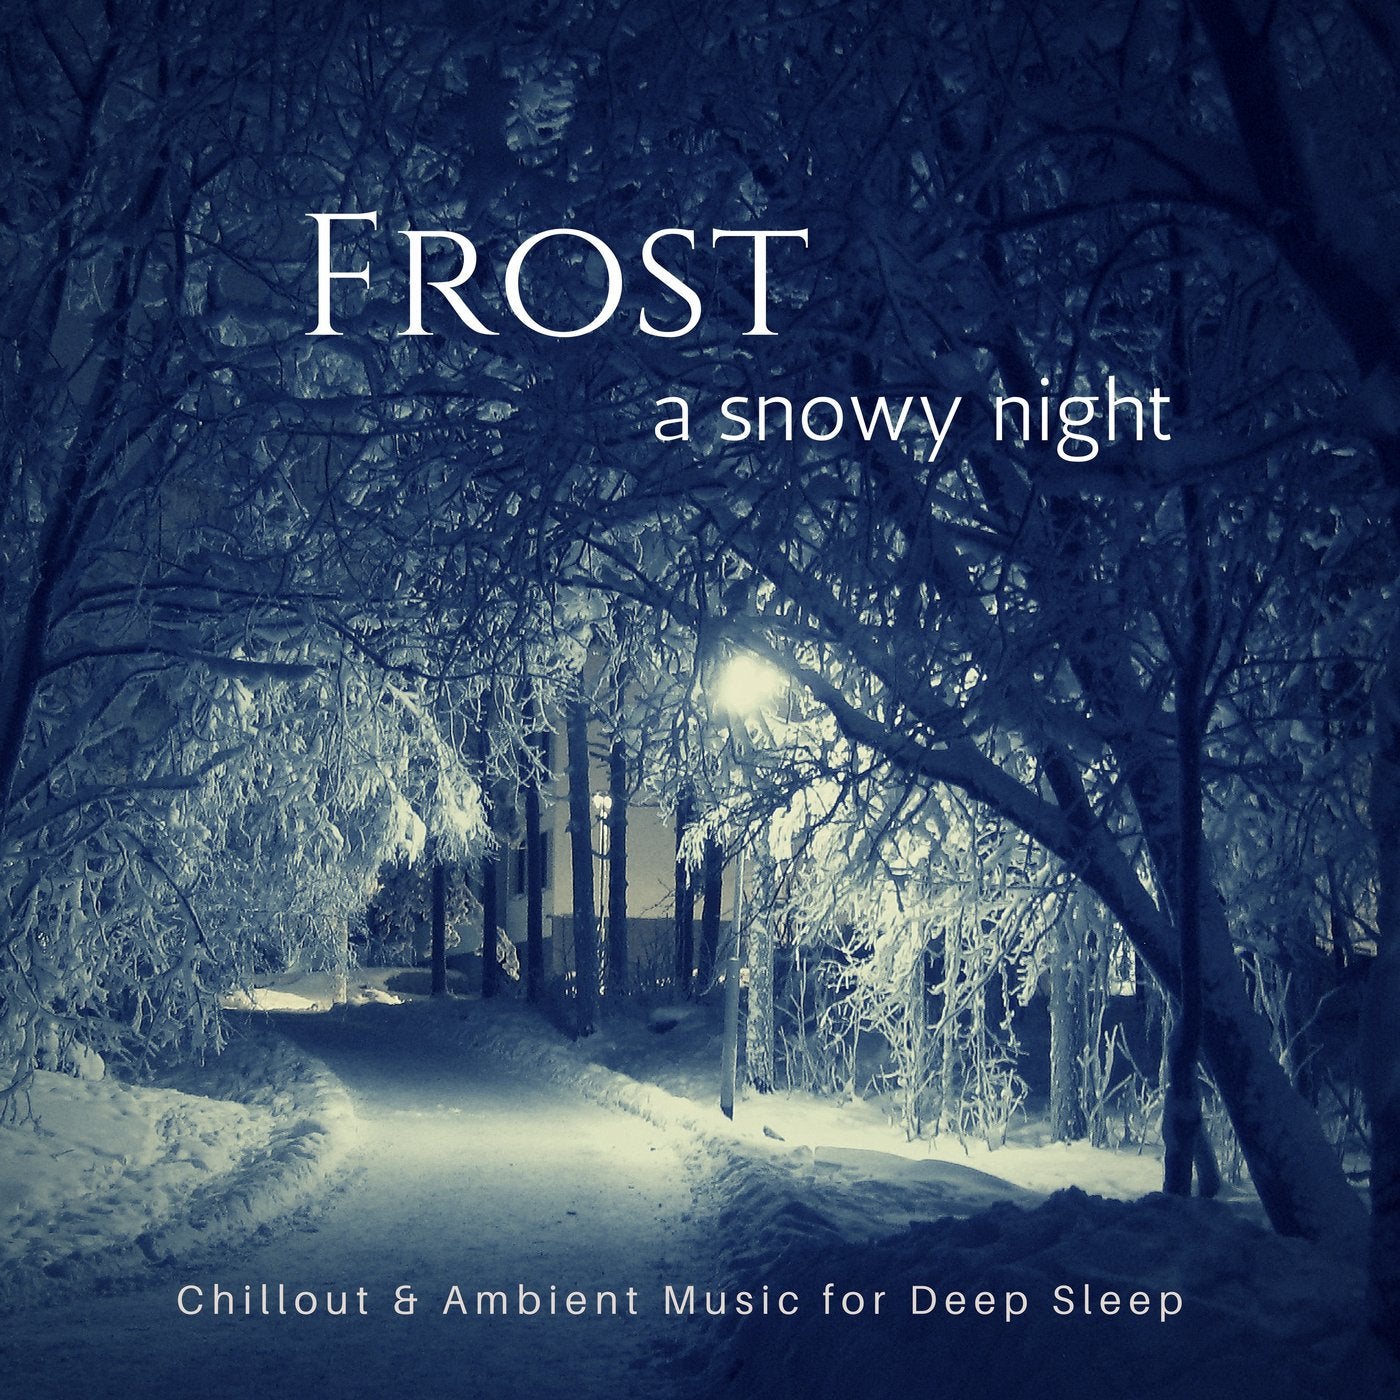 Frost - A Snowy Night (Chillout & Ambient Music For Deep Sleep)